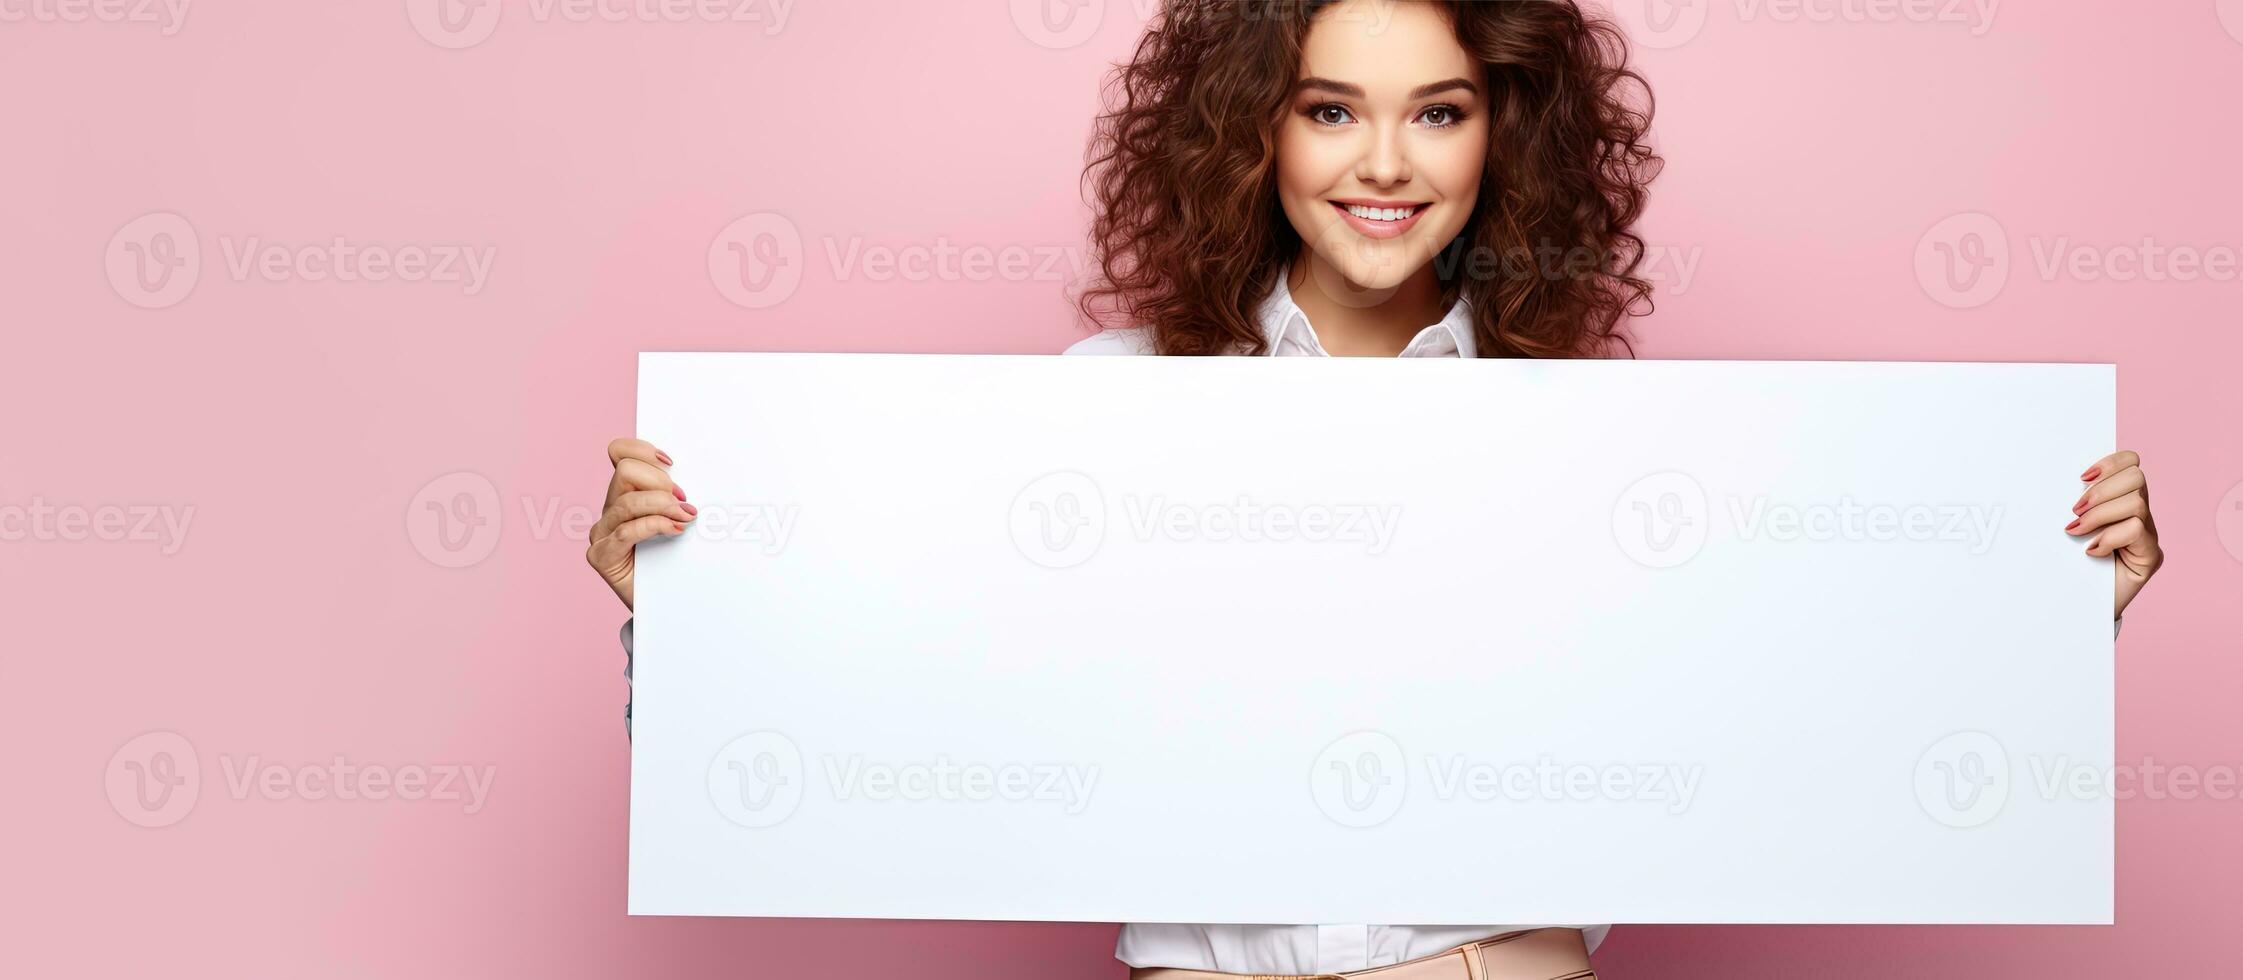 Smiling brunette woman stands by large empty advertising board pink background space for text photo